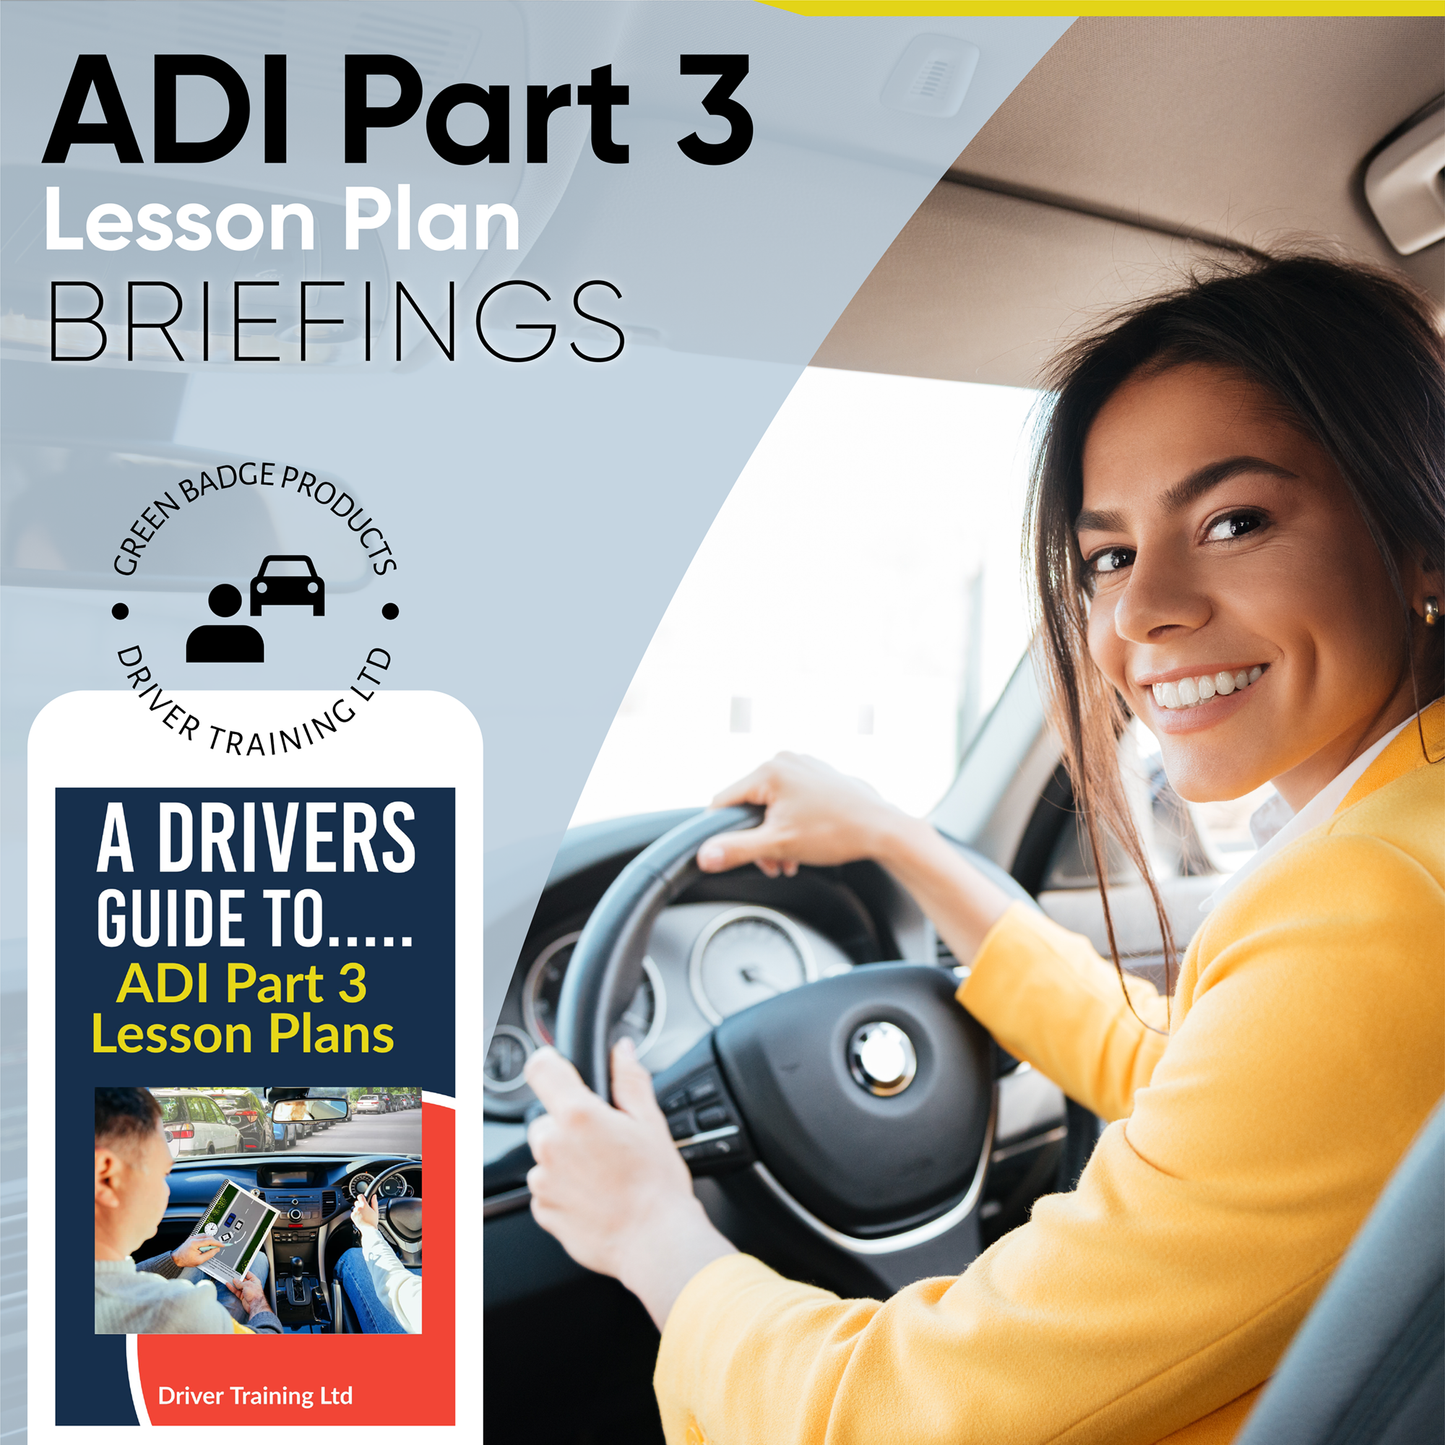 Driving instructor resources